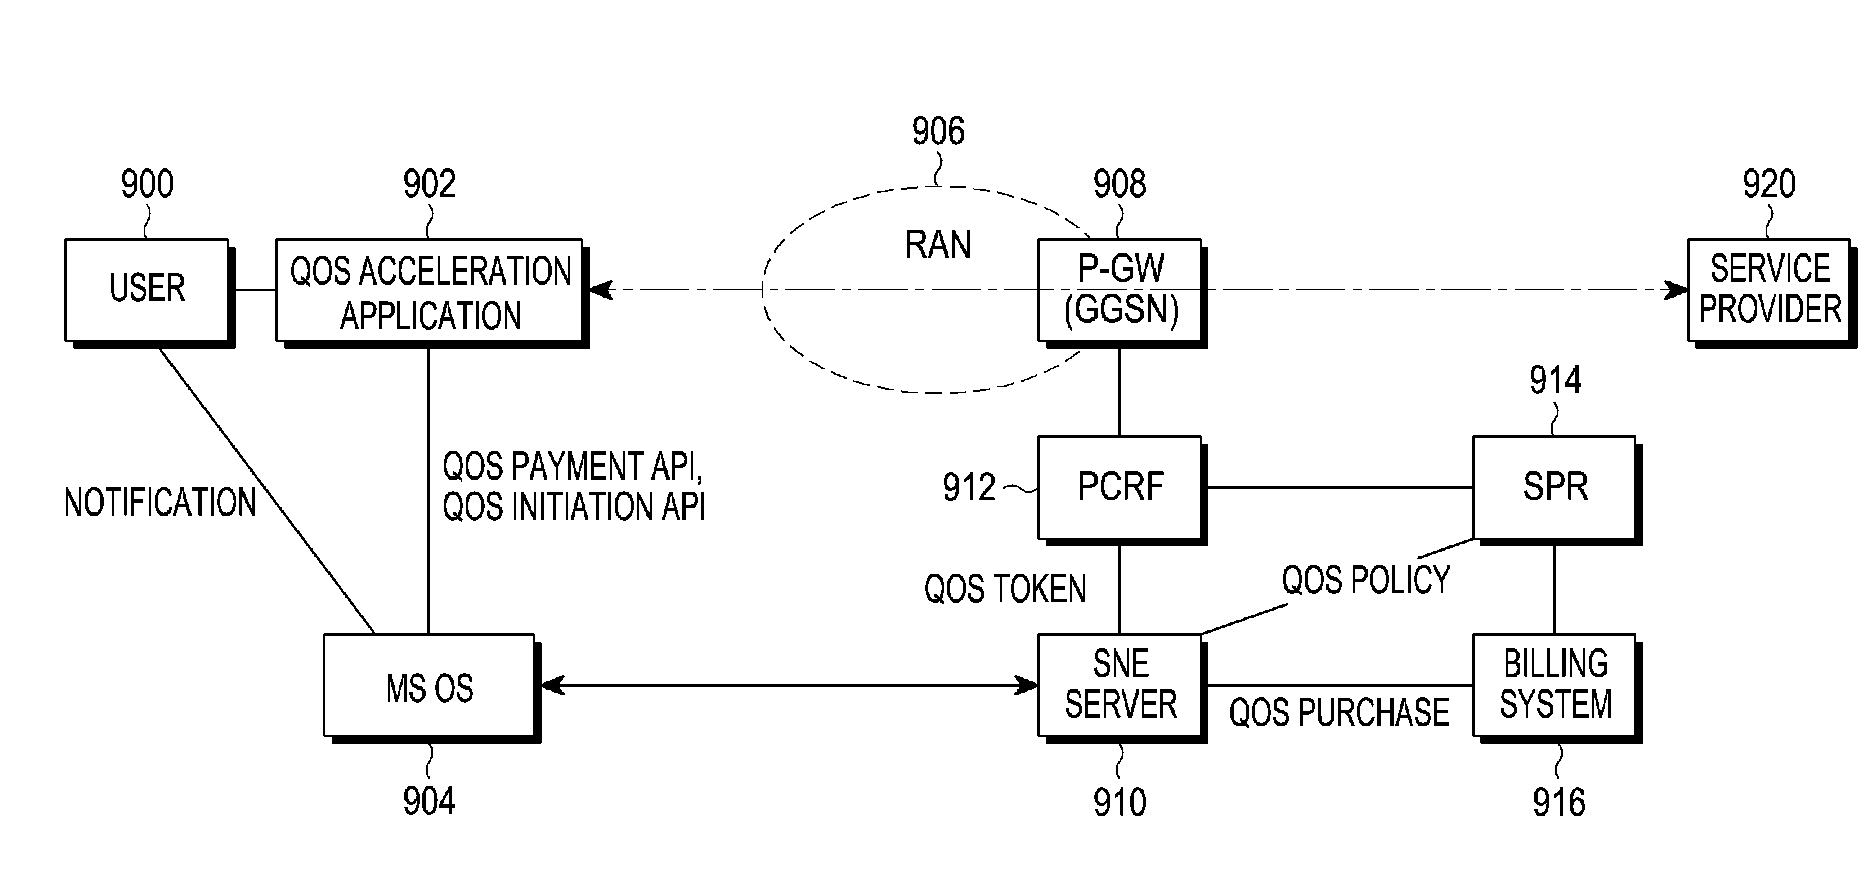 Method and apparatus for providing qos-based service in wireless communication system